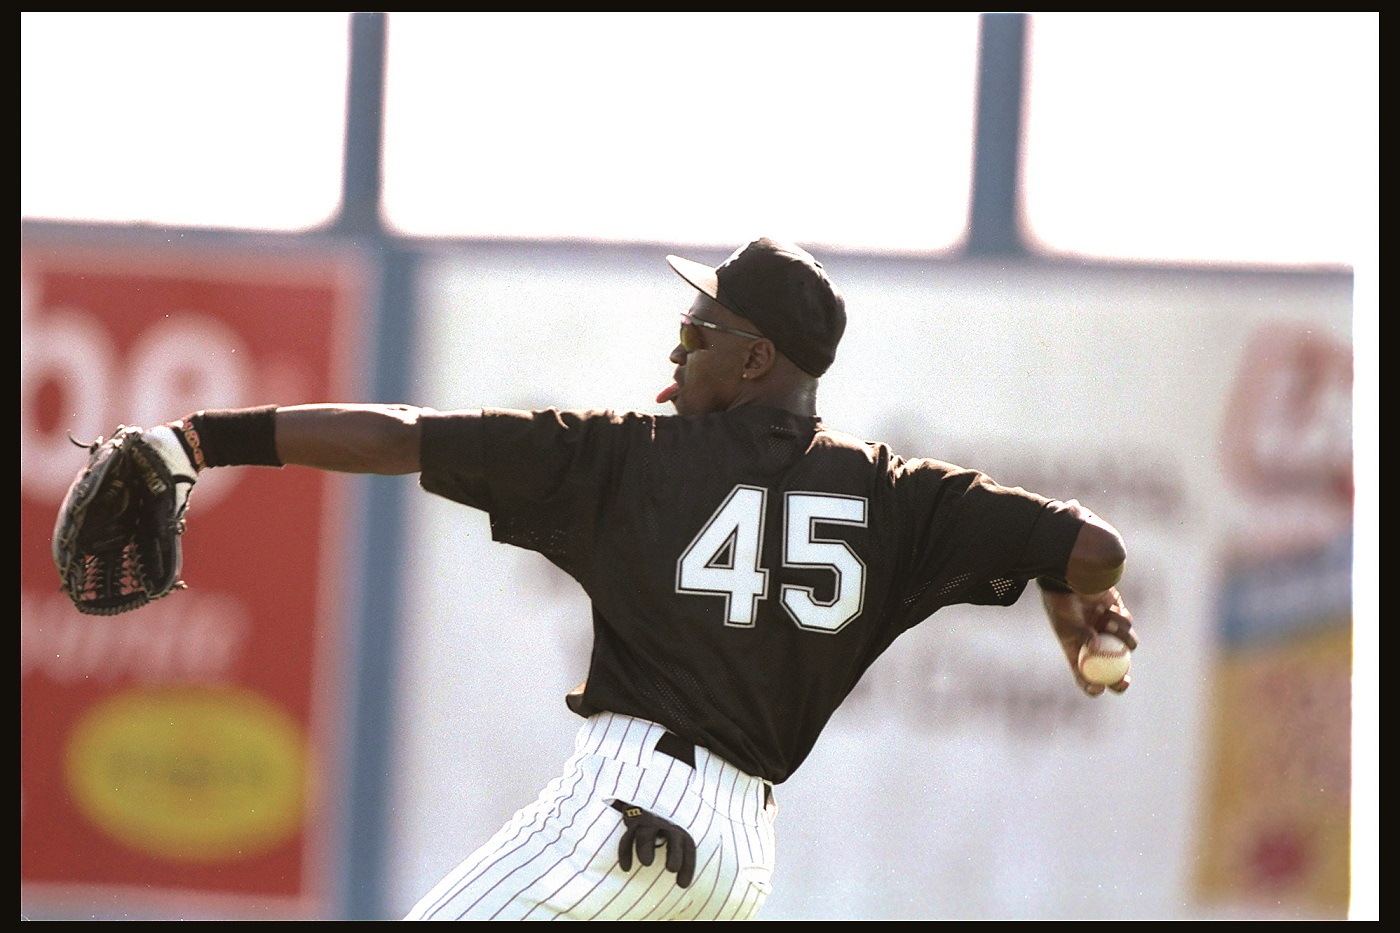 15 FEB 1994:  MICHAEL JORDAN MAKES A THROW DURING HIS FIRST OUTDOOR PUBLIC WORKOUT WITH THE CHICAGO WHITE SOX AT ED SMITH STADIUM IN SARASOTA, FLORIDA. Mandatory Credit: Al Bello  /Allsport